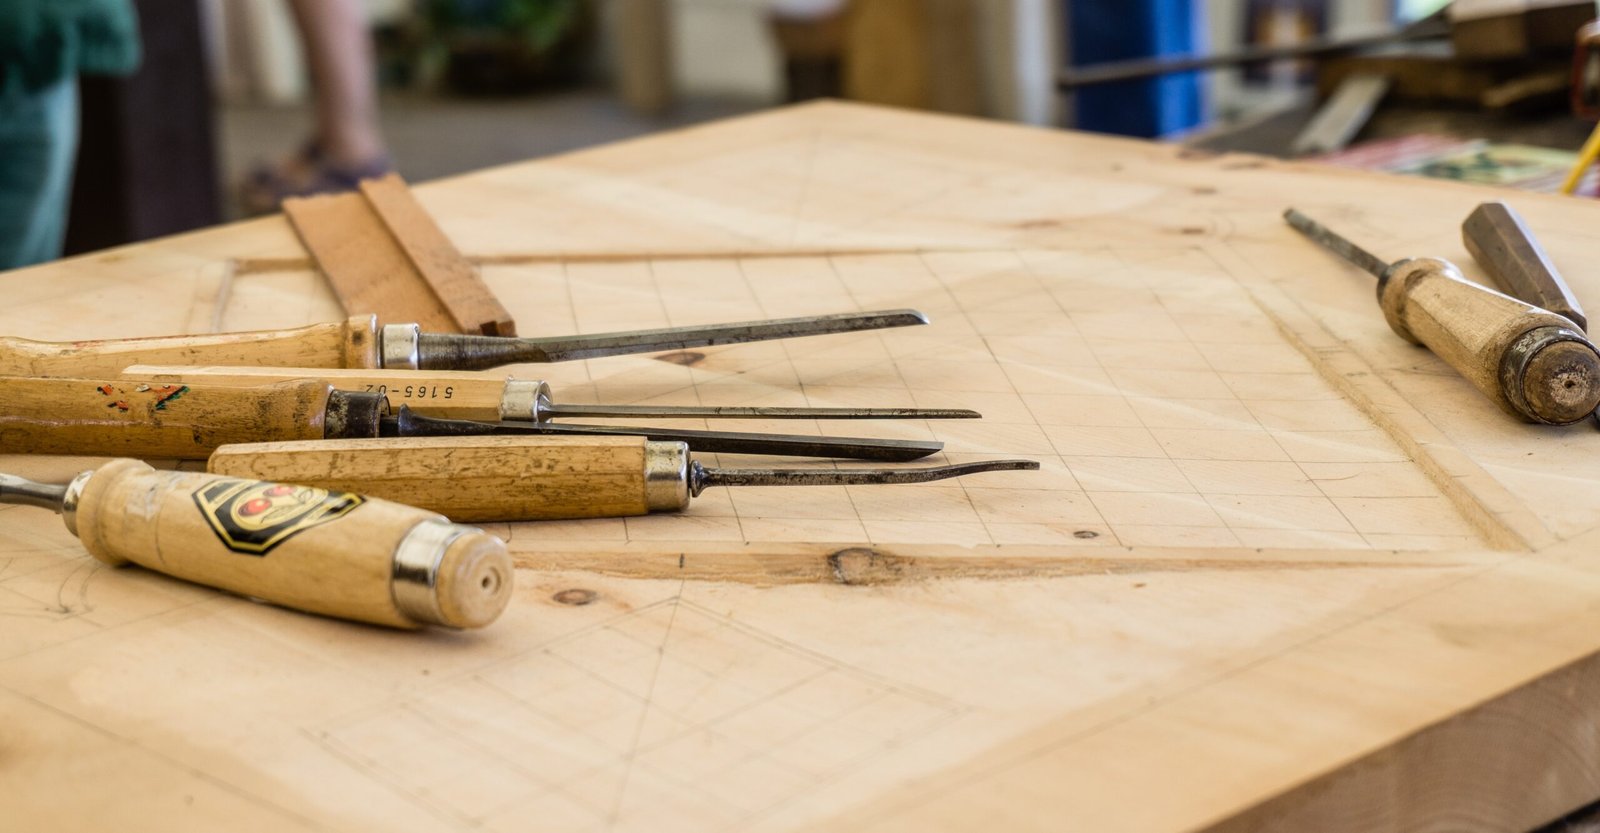 BEGINNER'S GUIDE TO WOOD CARVING TOOLS & TECHNIQUES